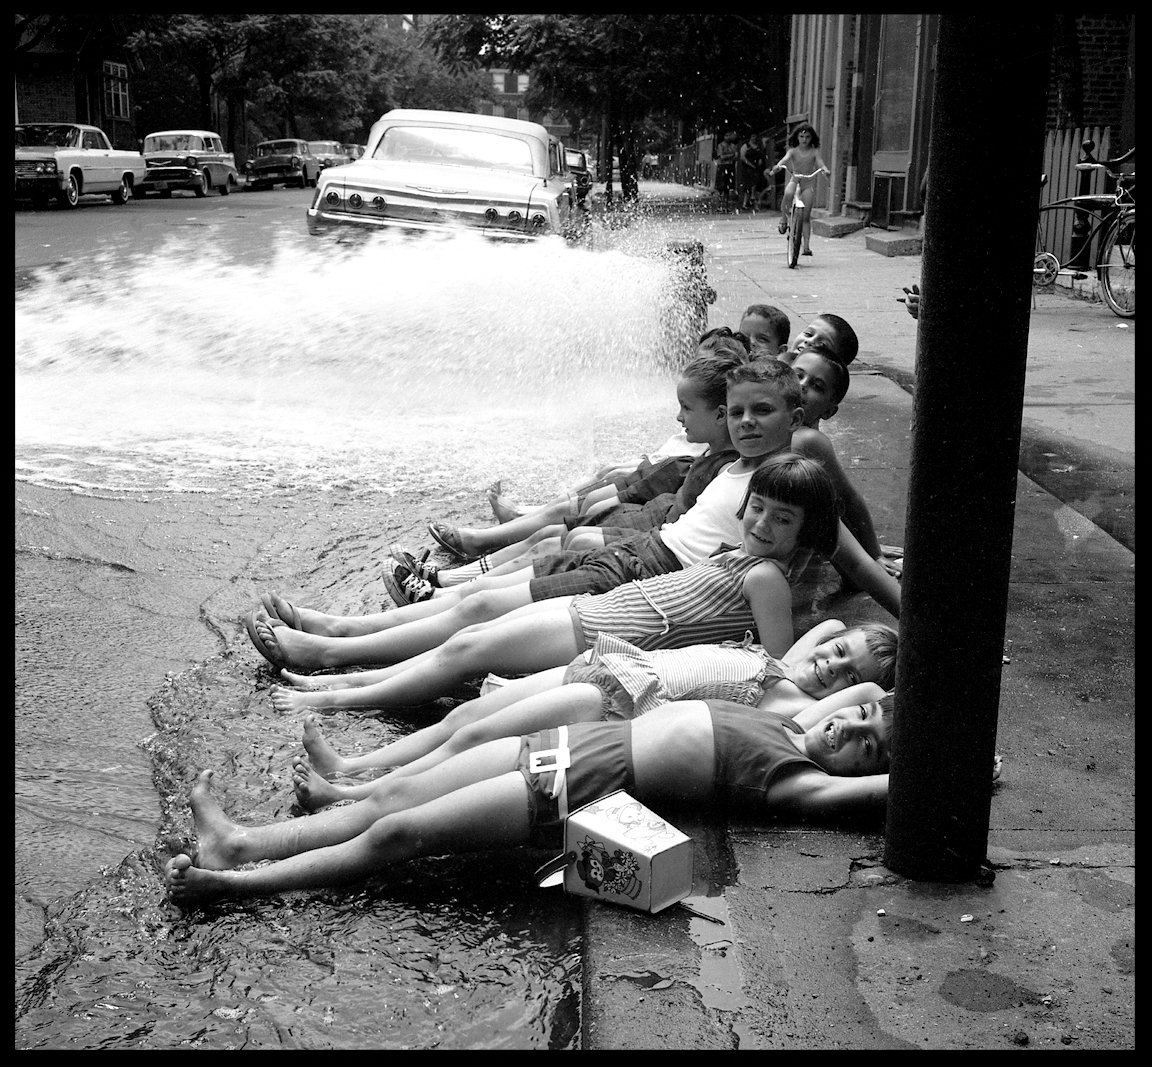 Kids Cooling Off at Johnny Pump ( Fire Hydrant ) c.1960 from original 4x5 negative